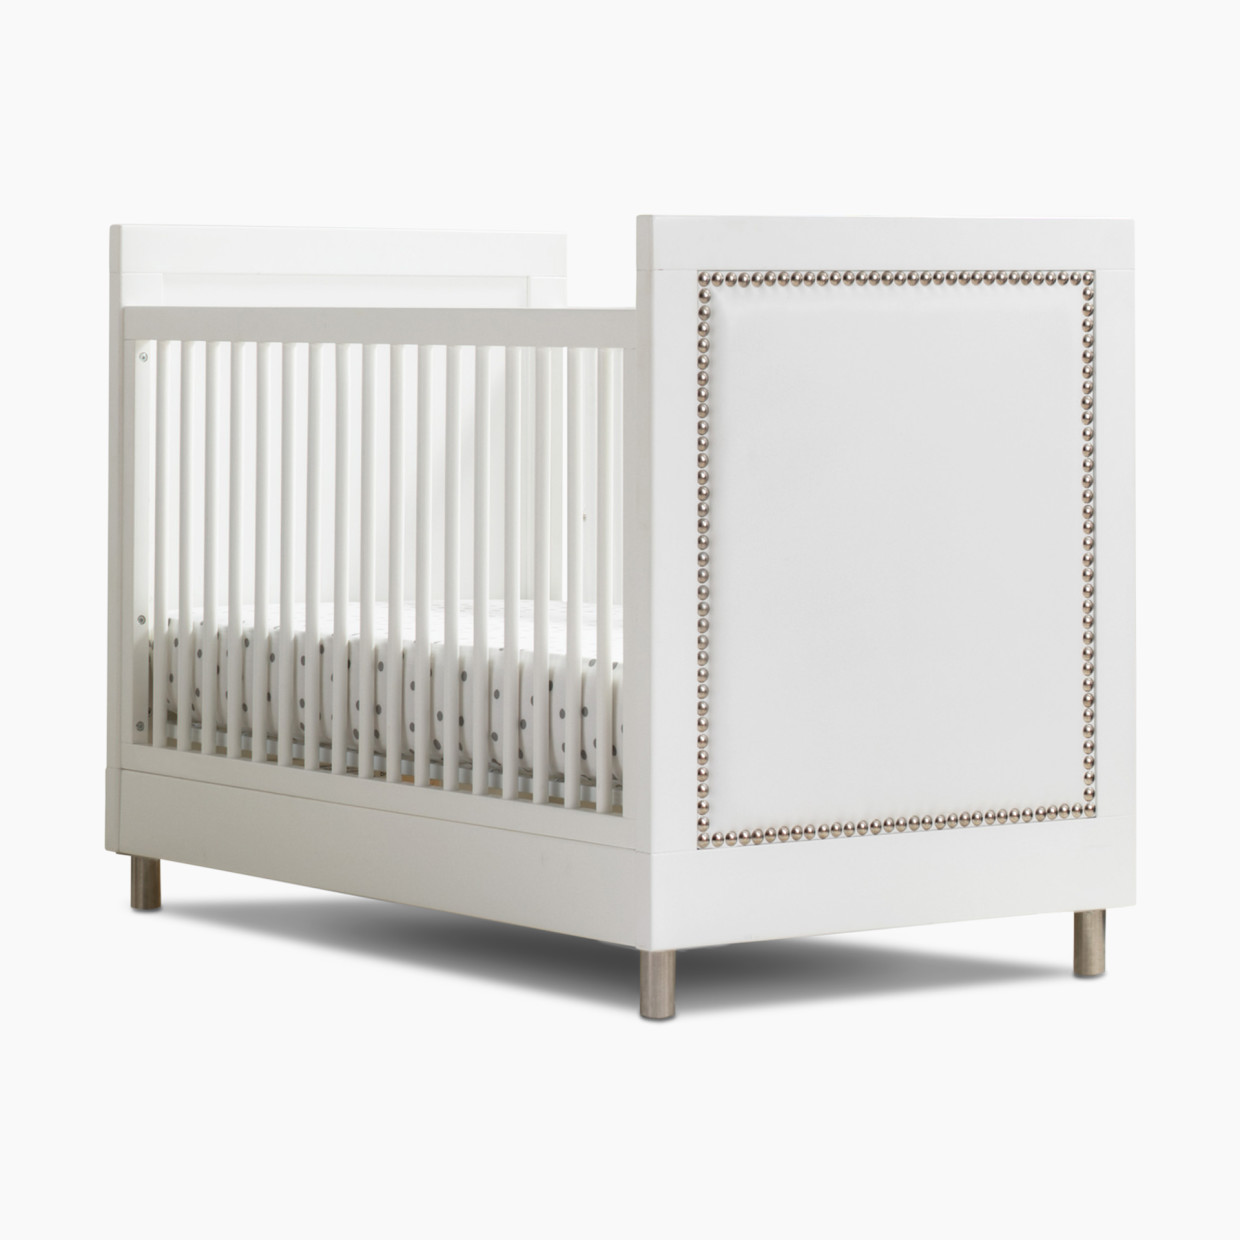 Simmons Kids Avery 3-in-1 Baby Crib with Toddler Bed Conversion Kit - Bianca White.